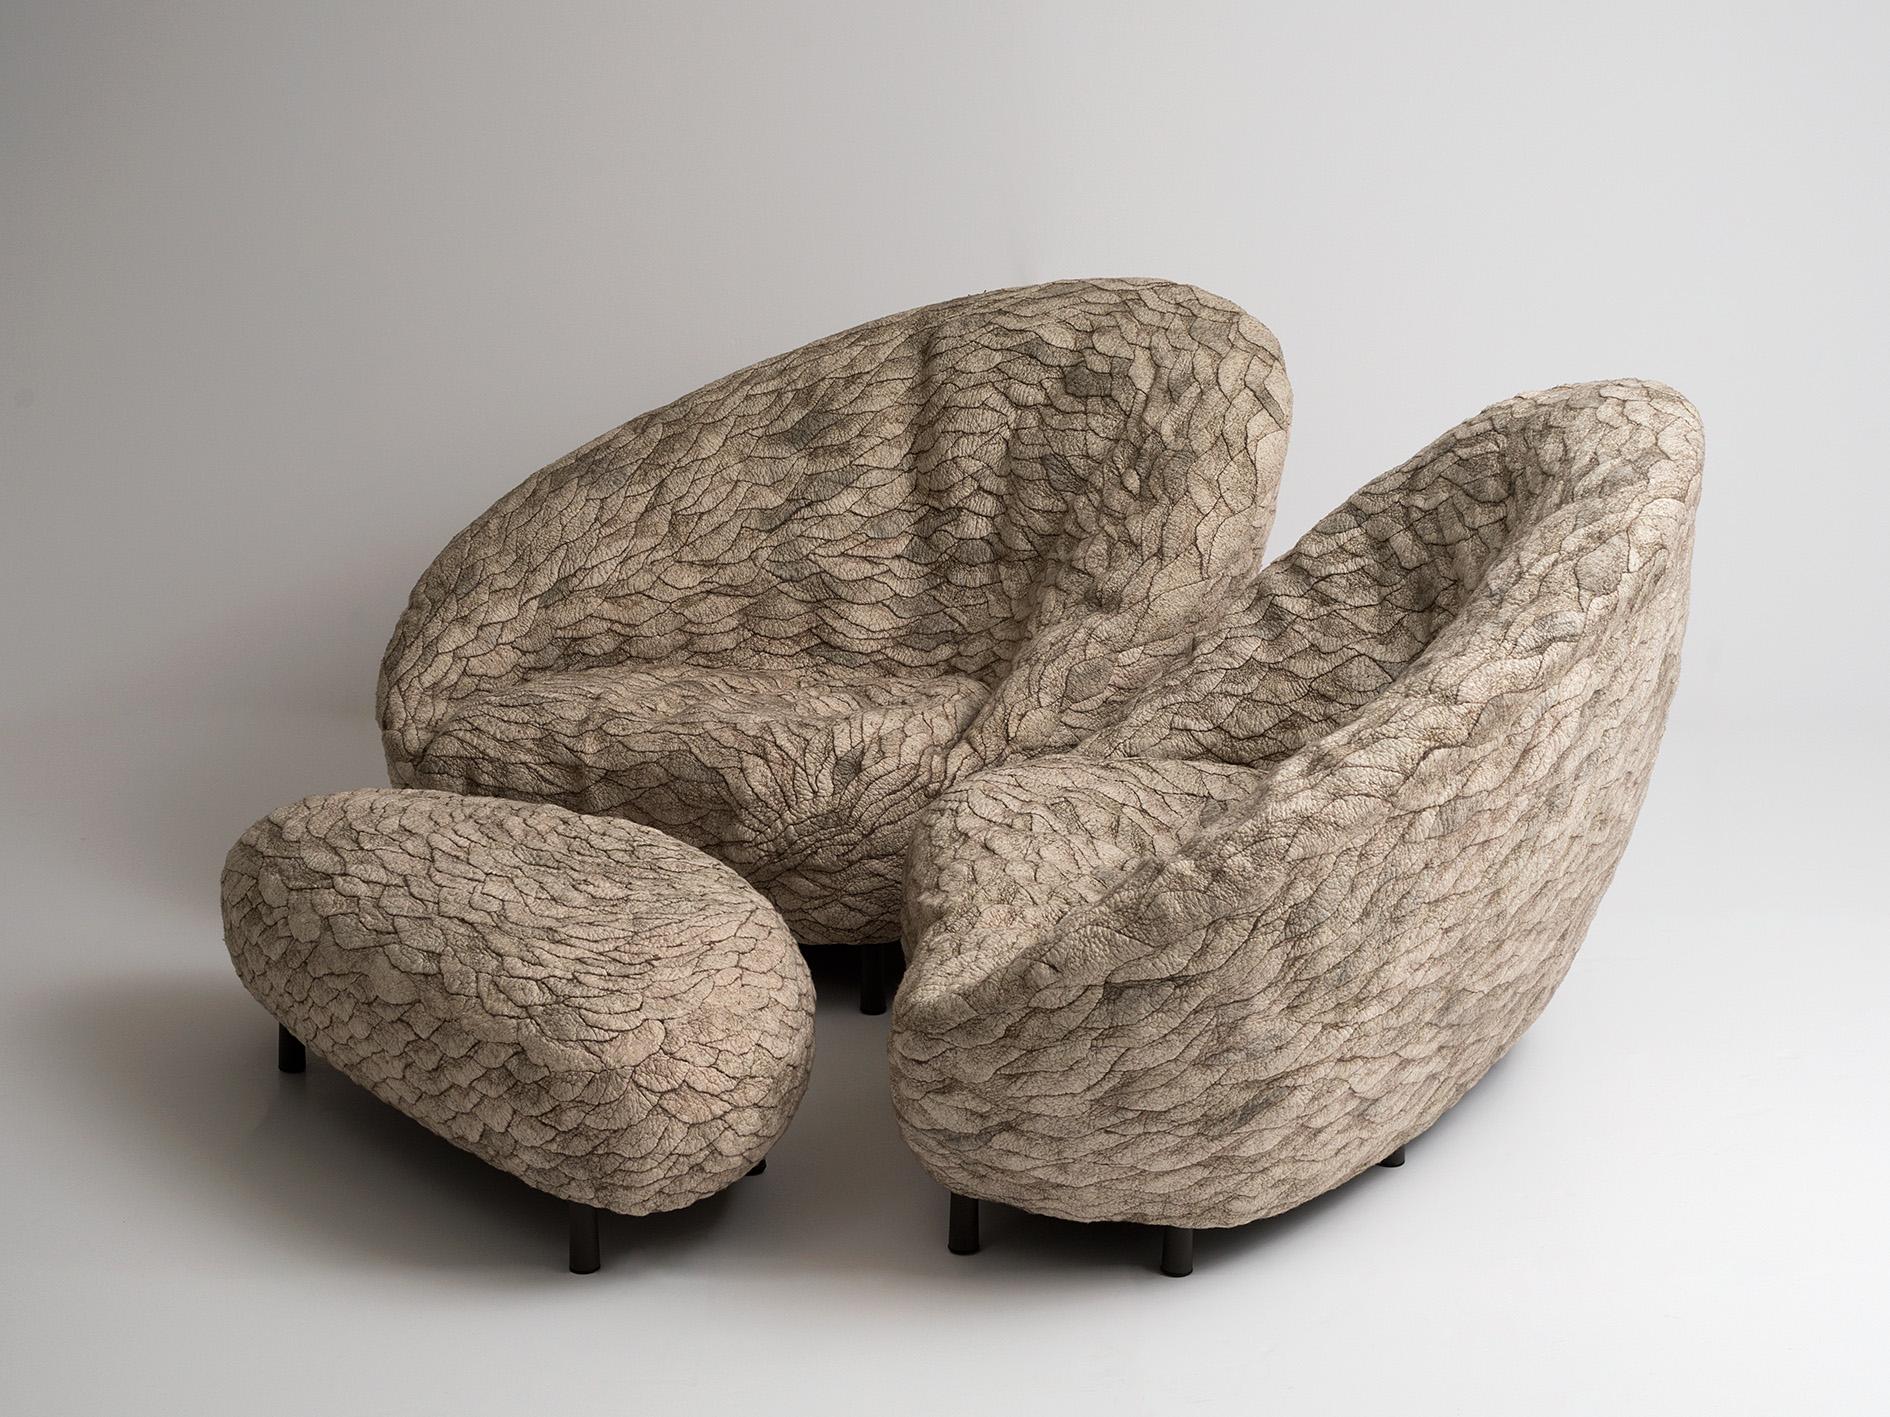 Rapa Series consists of pieces felted by hand, recalling ancient textiles. Utilizing wool and silk, these one-of-a-kind fiber art pieces are softly molded over organic sculptural structures, which are both artistic and comfortable.

Three pieces in